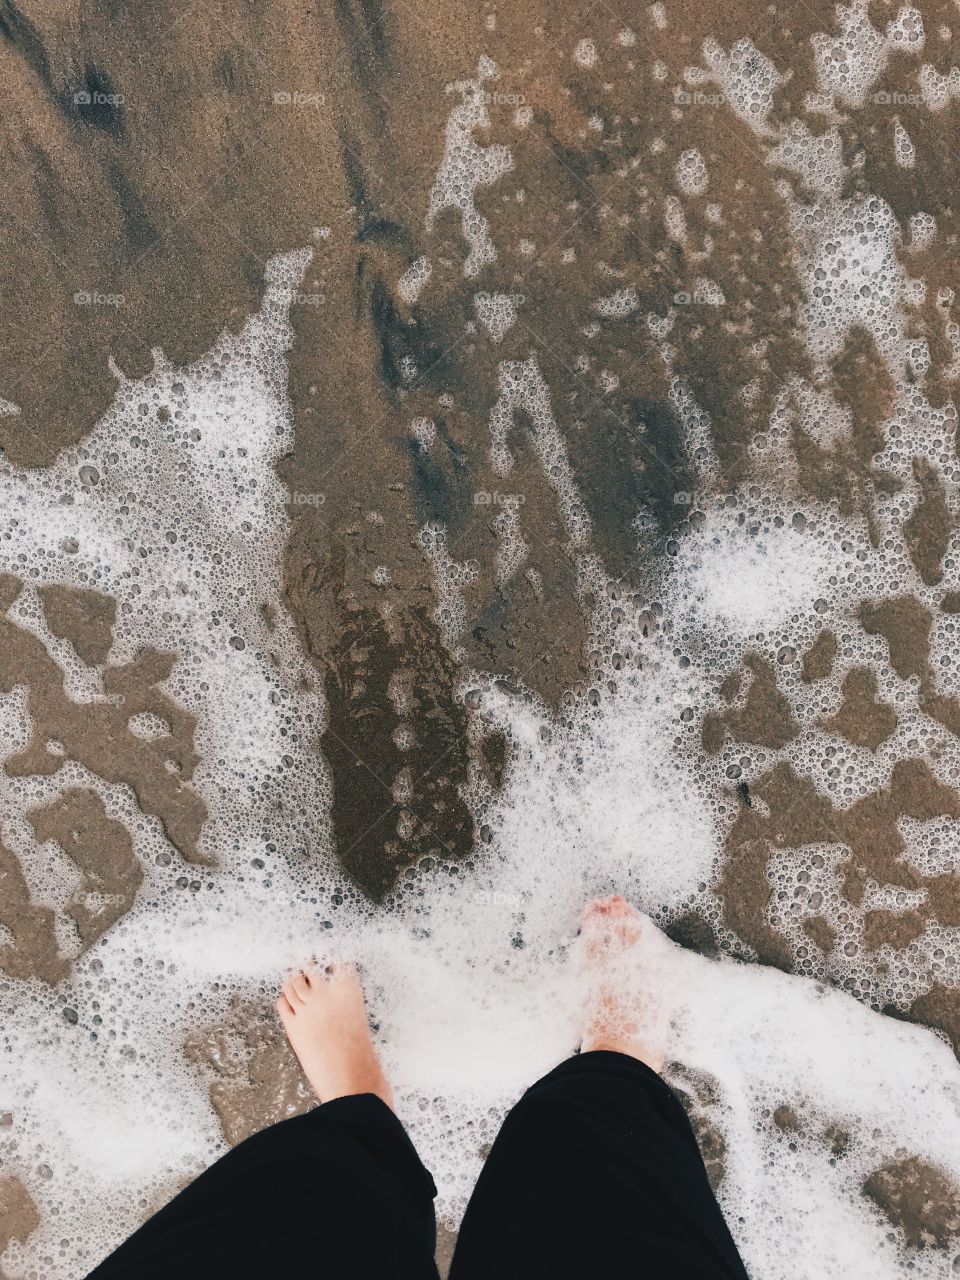 Putting my feet in the Pacific Ocean:)